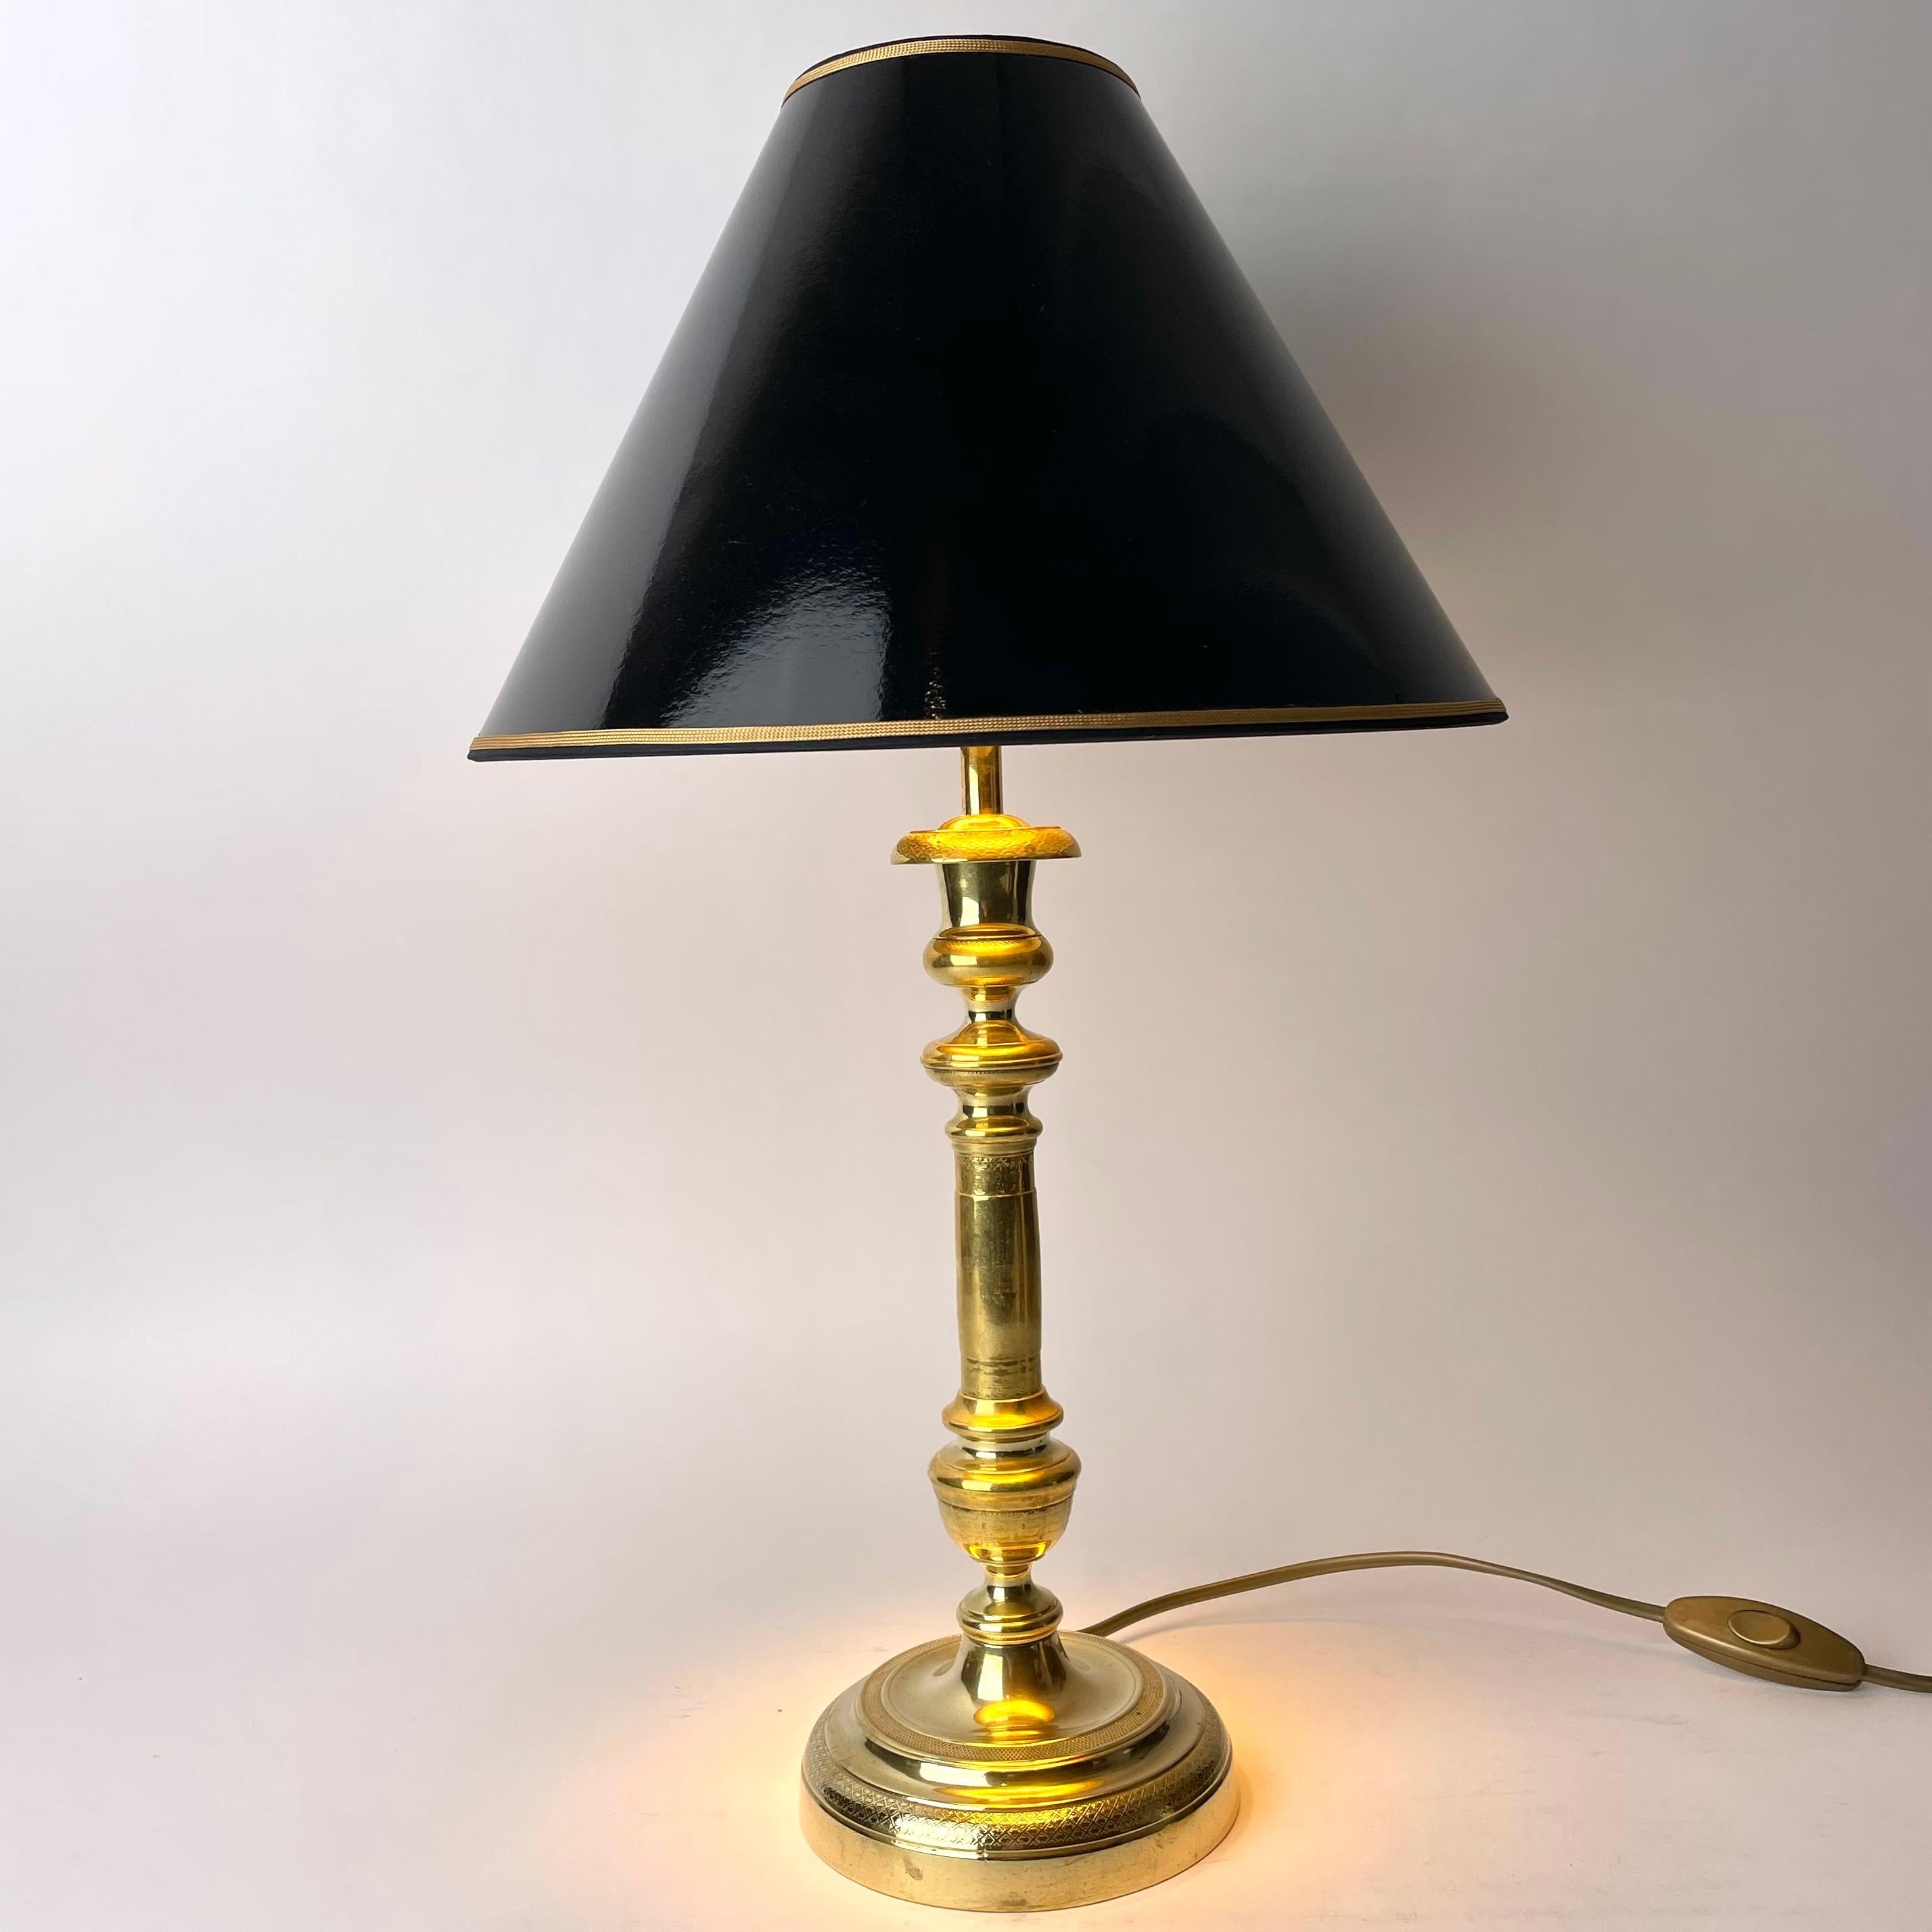 Beautiful Table Lamp, originally a Empire Candlestick i Bronze from France during the 1820s.

Newly rewired electricity 

New lampshades in black lacquer with gilding on the inside to give a cozy glow.

Wear consistent with age and use 

